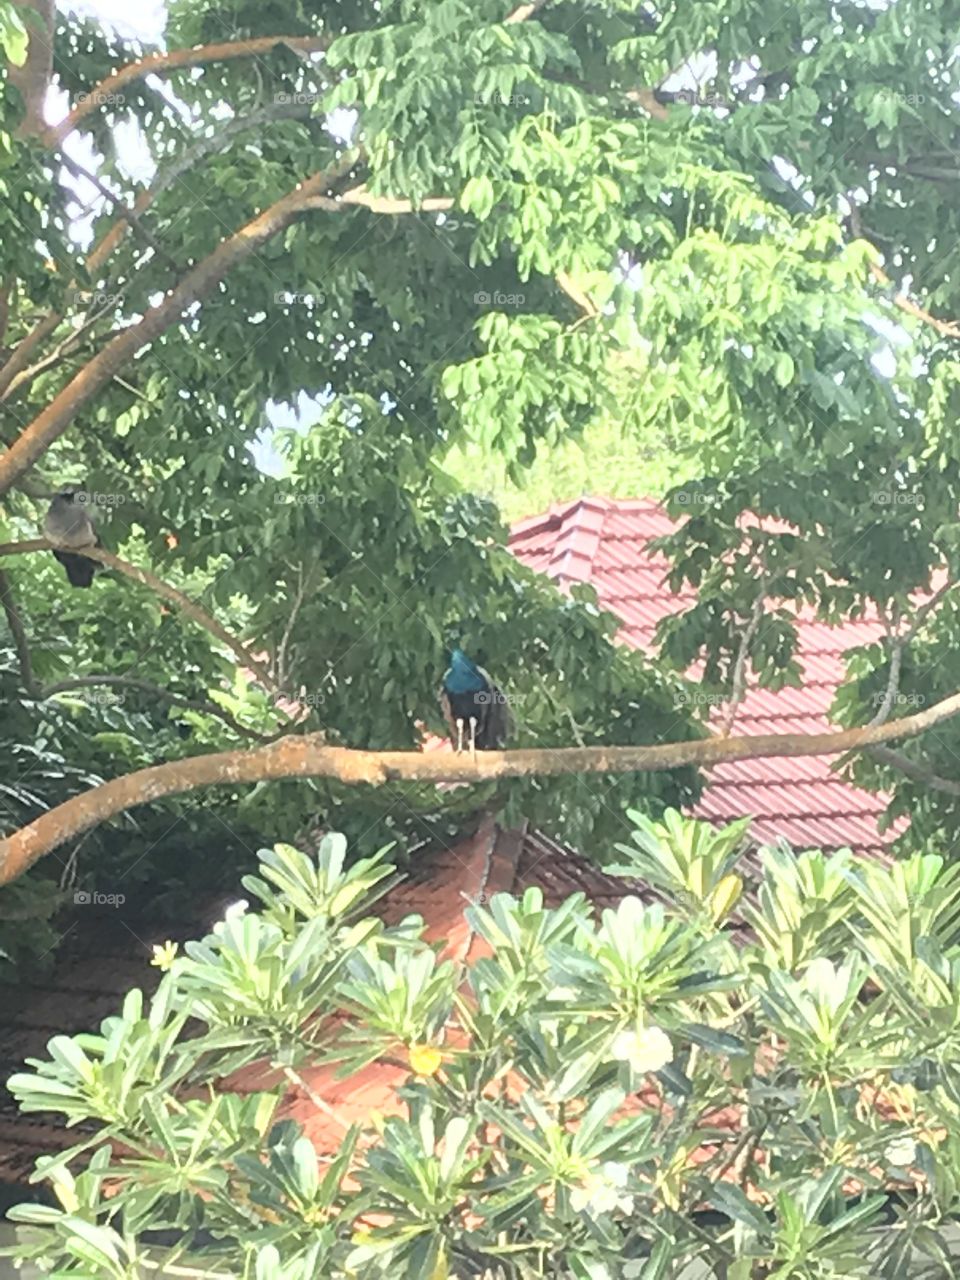 peacock on a tree